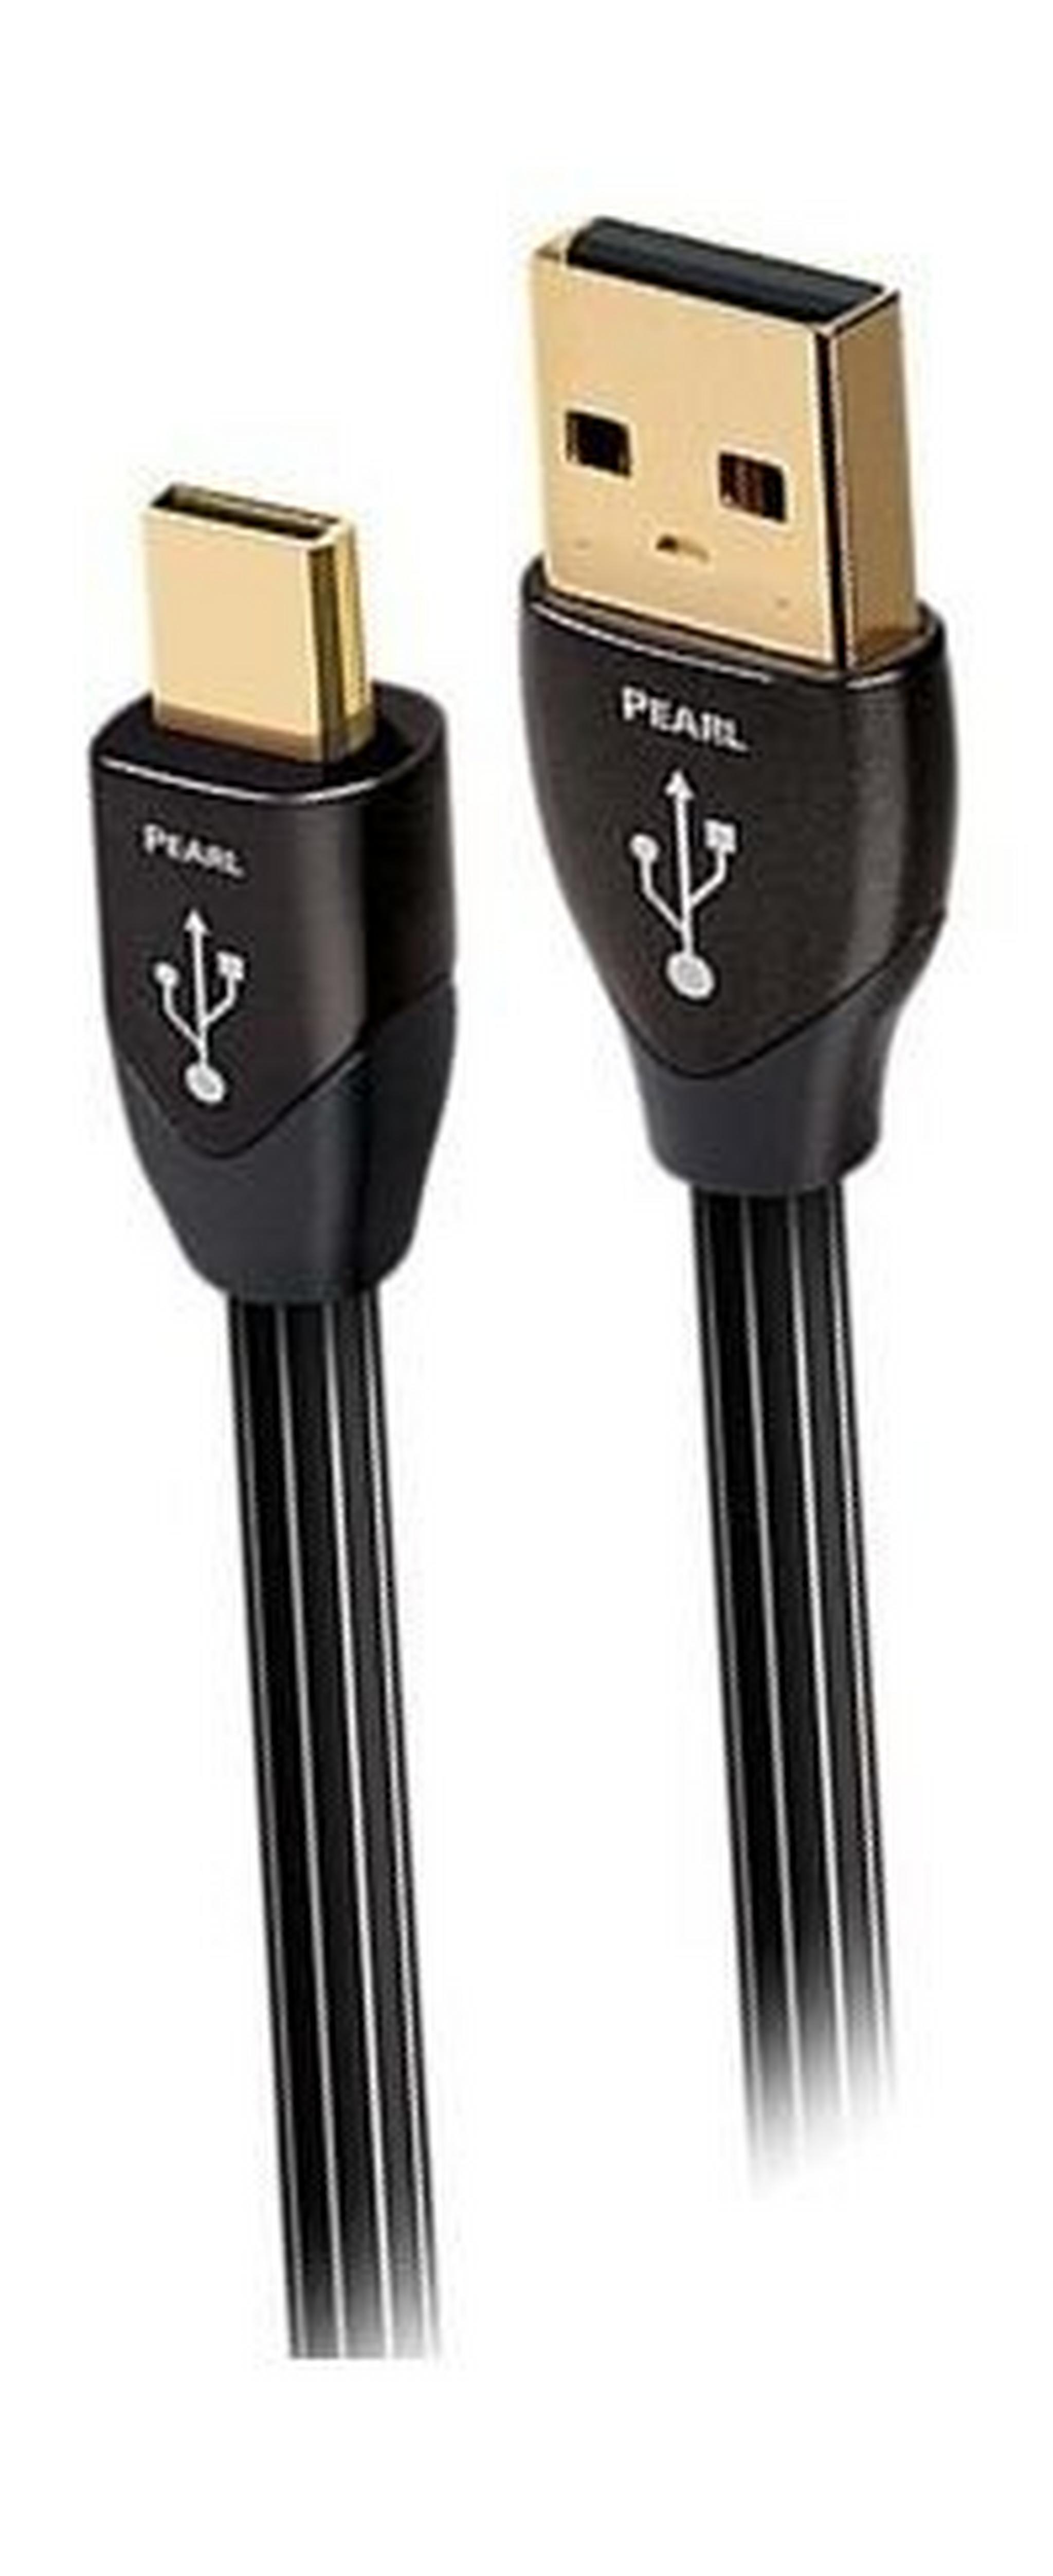 AudioQuest Pearl Plug and Play Micro-USB Cable 1.5 Meters - Black